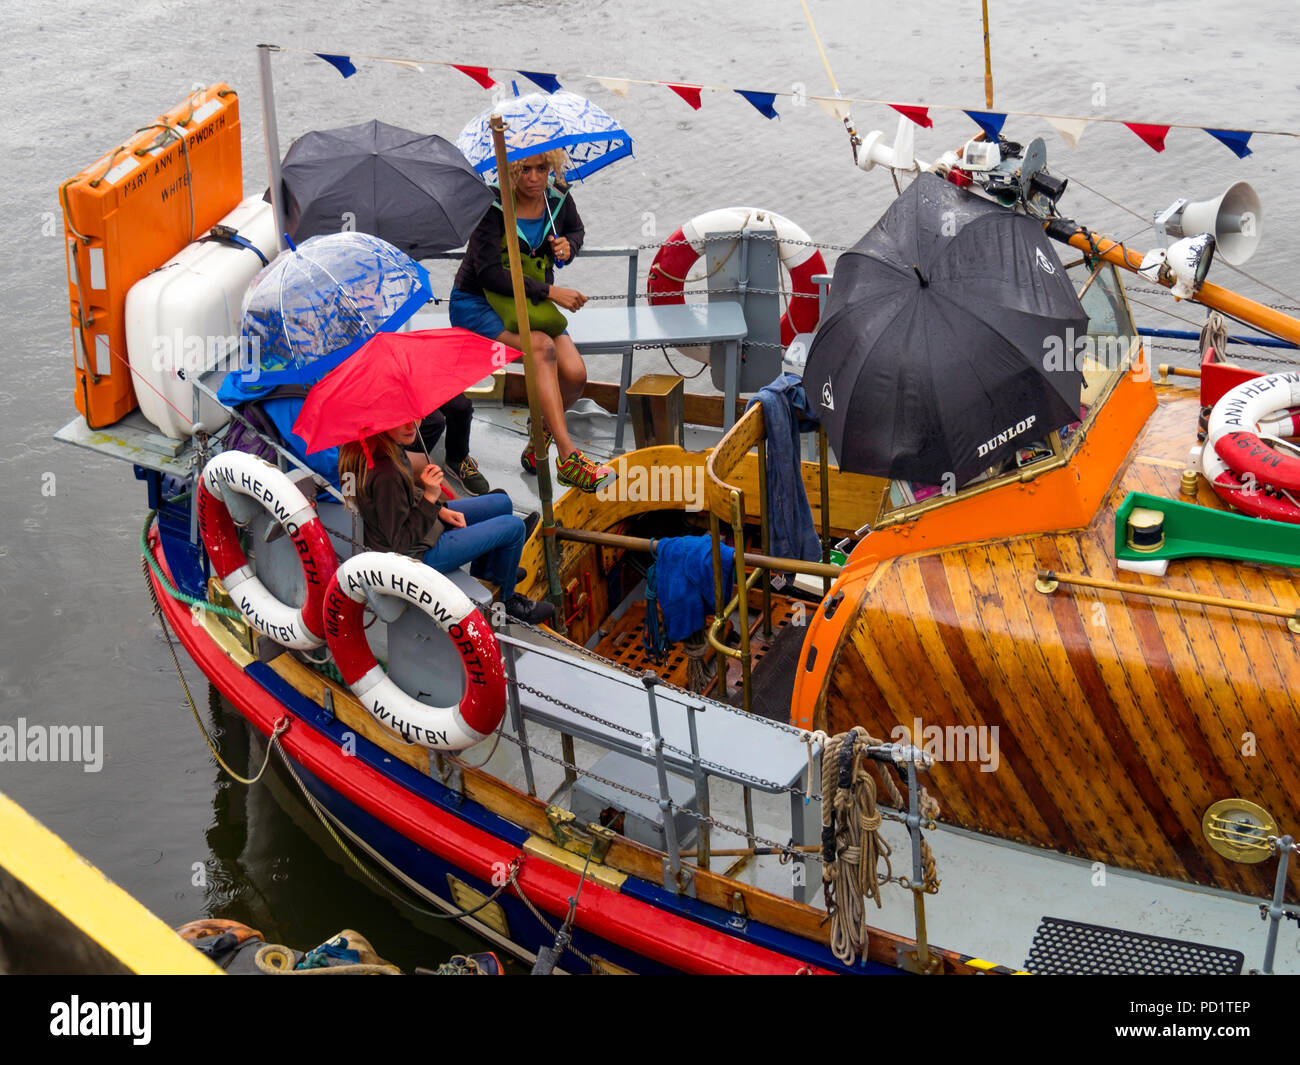 Passengers on the old Whitby Lifeboat 'Mary Ann Hepworth' in Whitby harbour waiting to go on a summer pleasure trip  umbrellas up in heavy rain Stock Photo